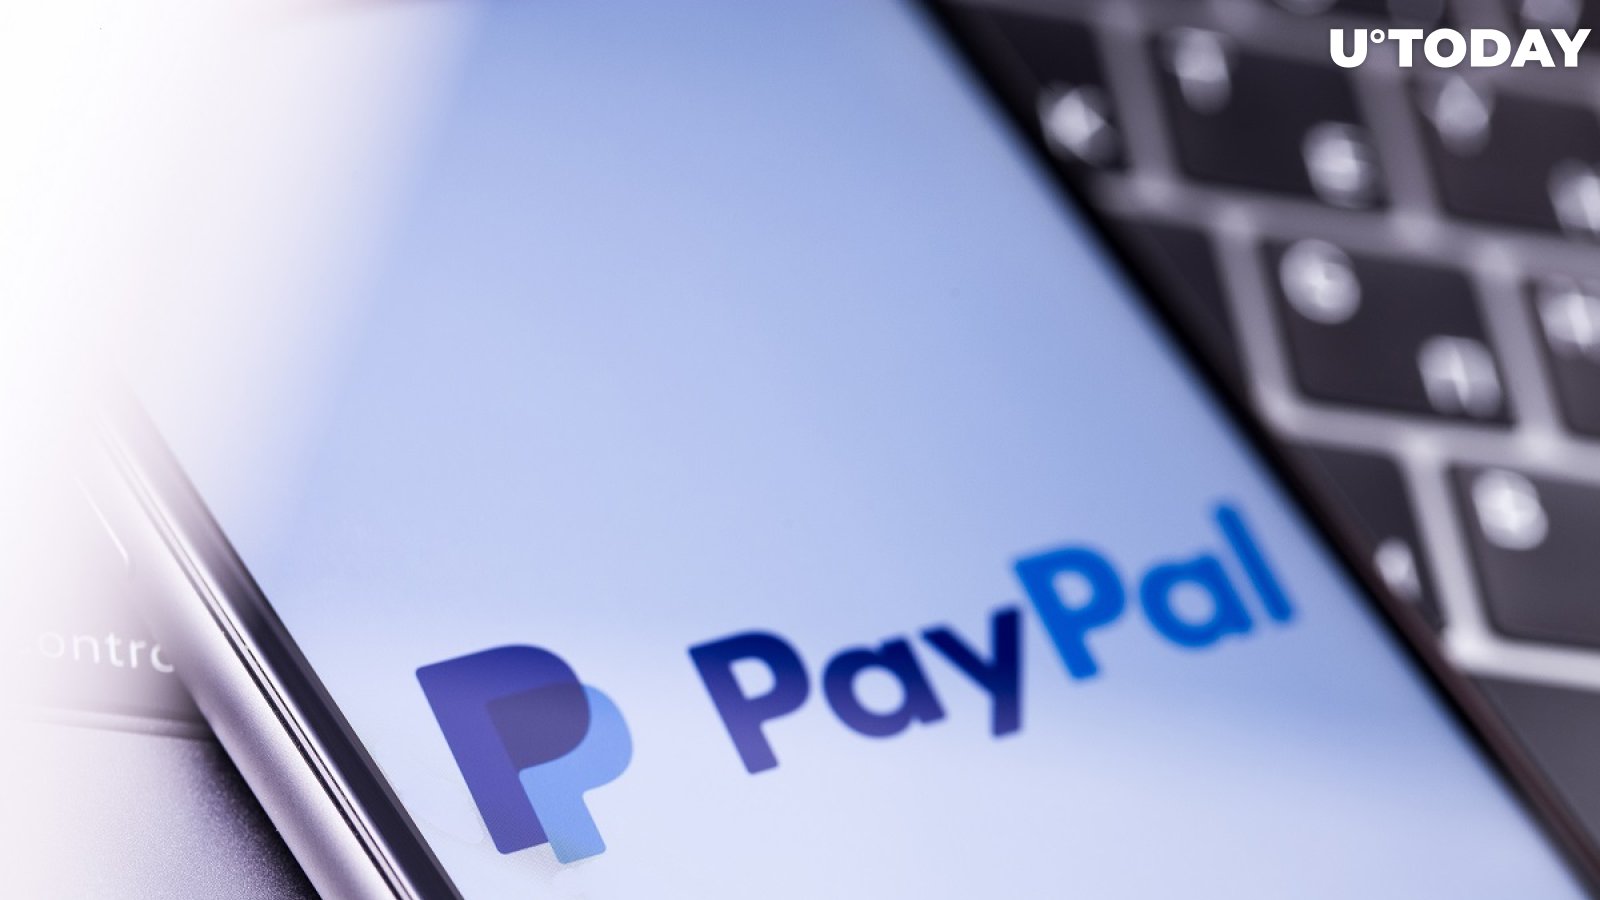 Demand for PayPal’s Cryptocurrency Offering Blows Past Expectations, According to CEO Dan Schulman        